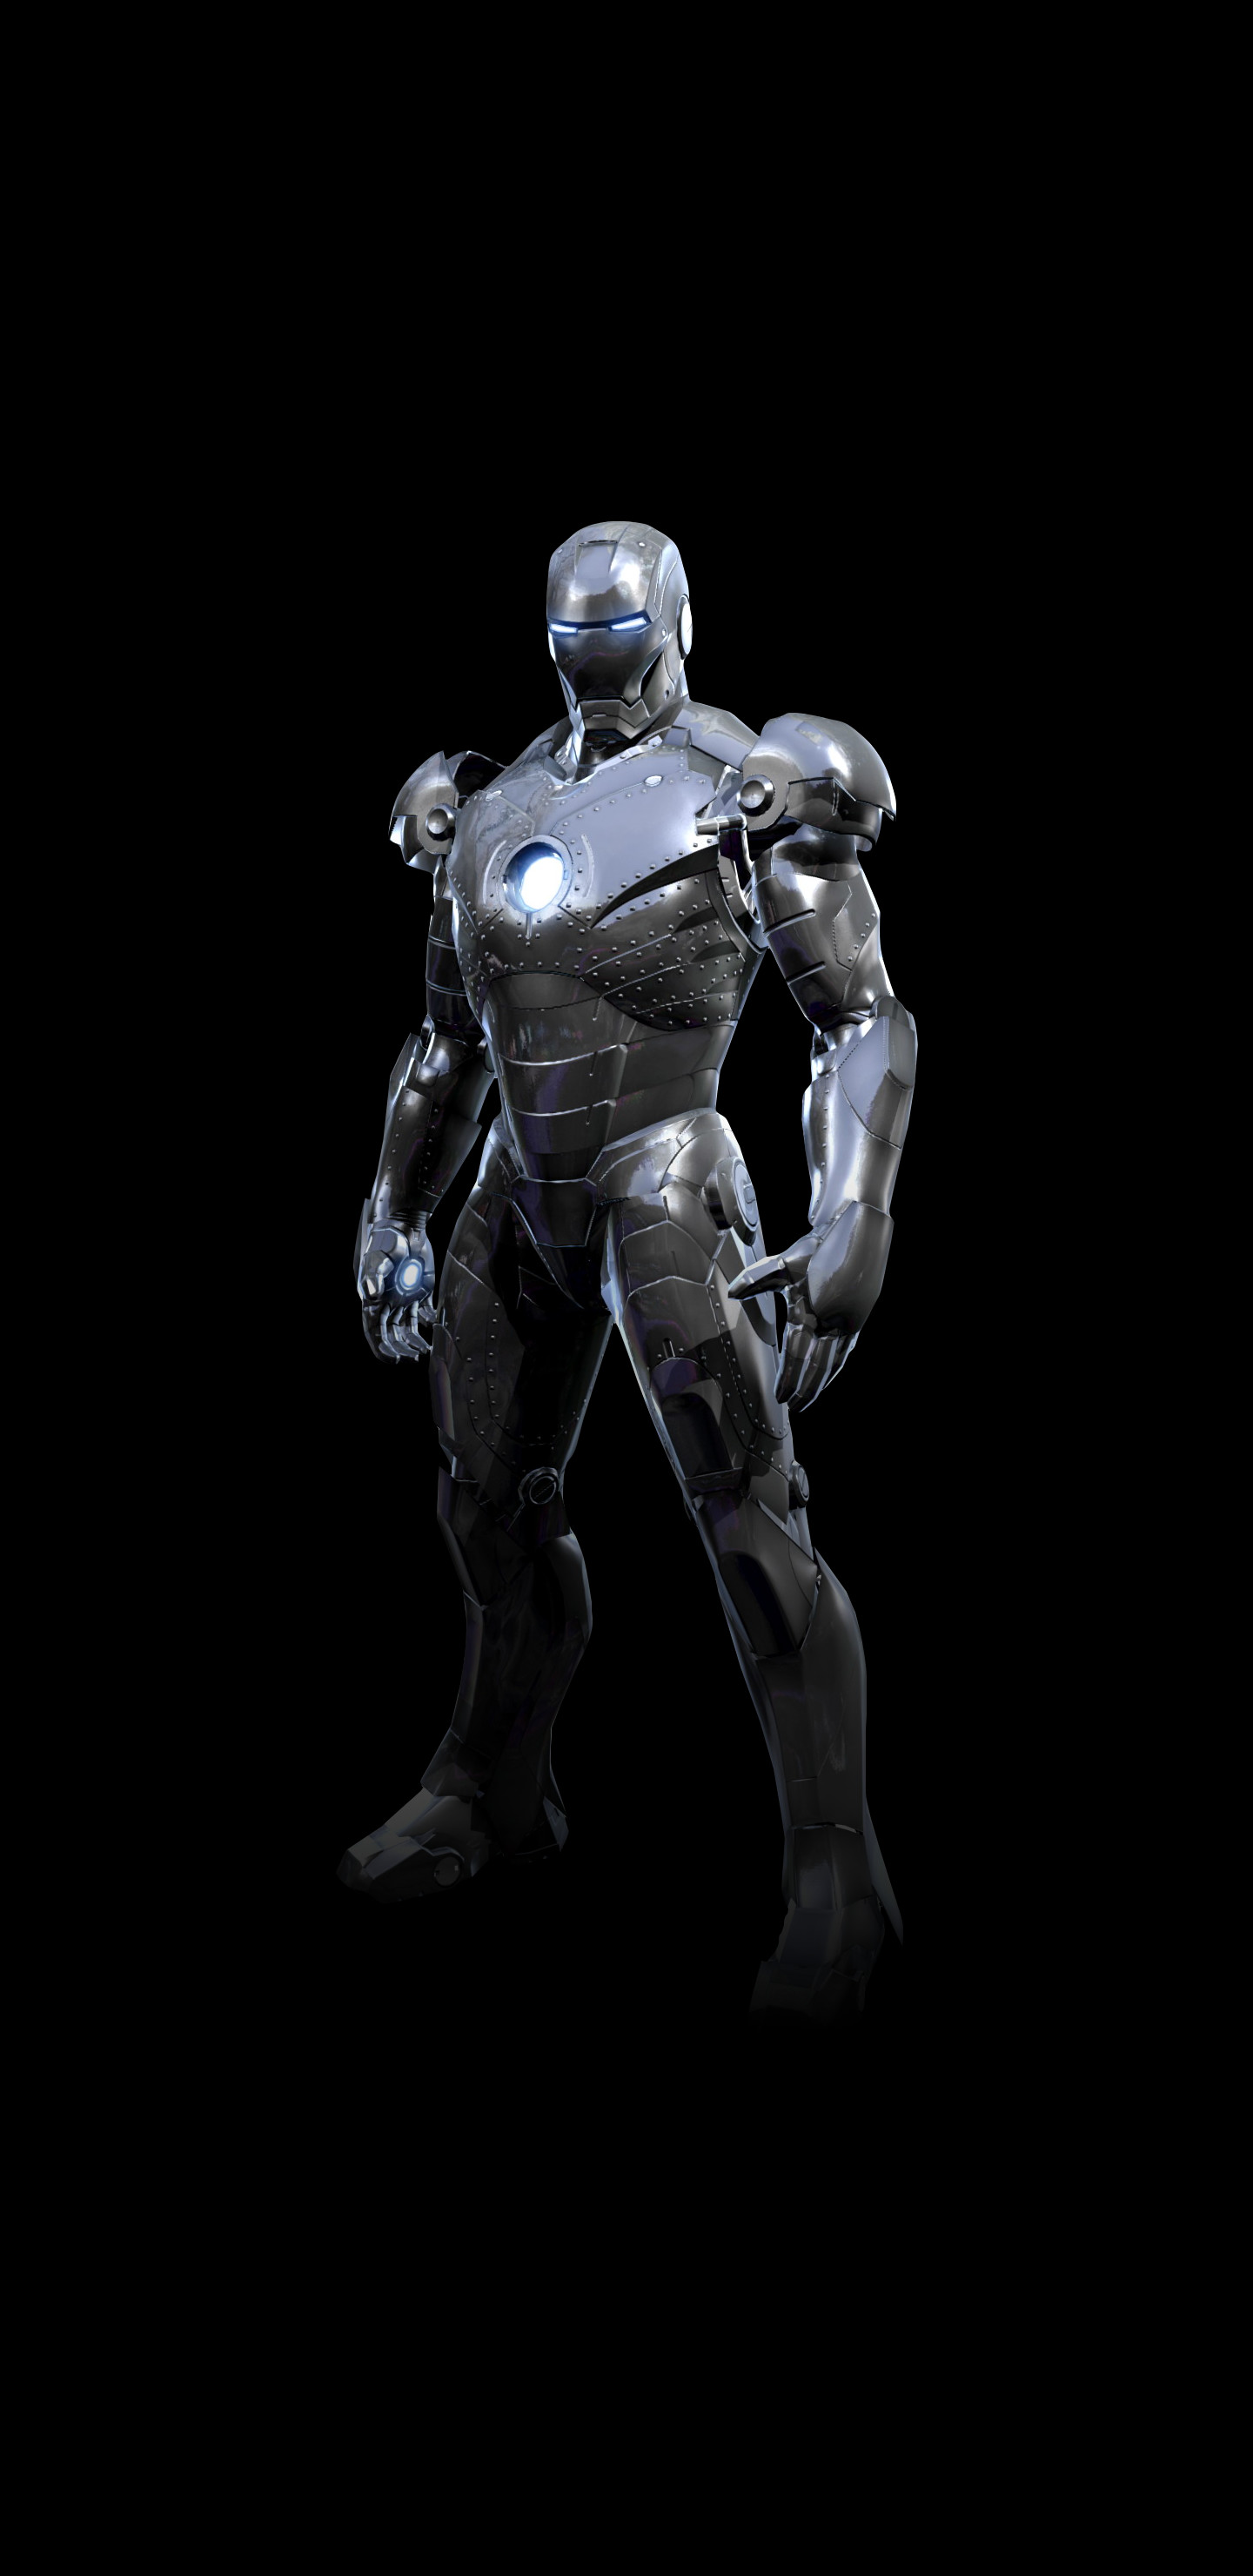 1440x2960 Iron Man suit, Mark II - Fulfilled Request [] ...